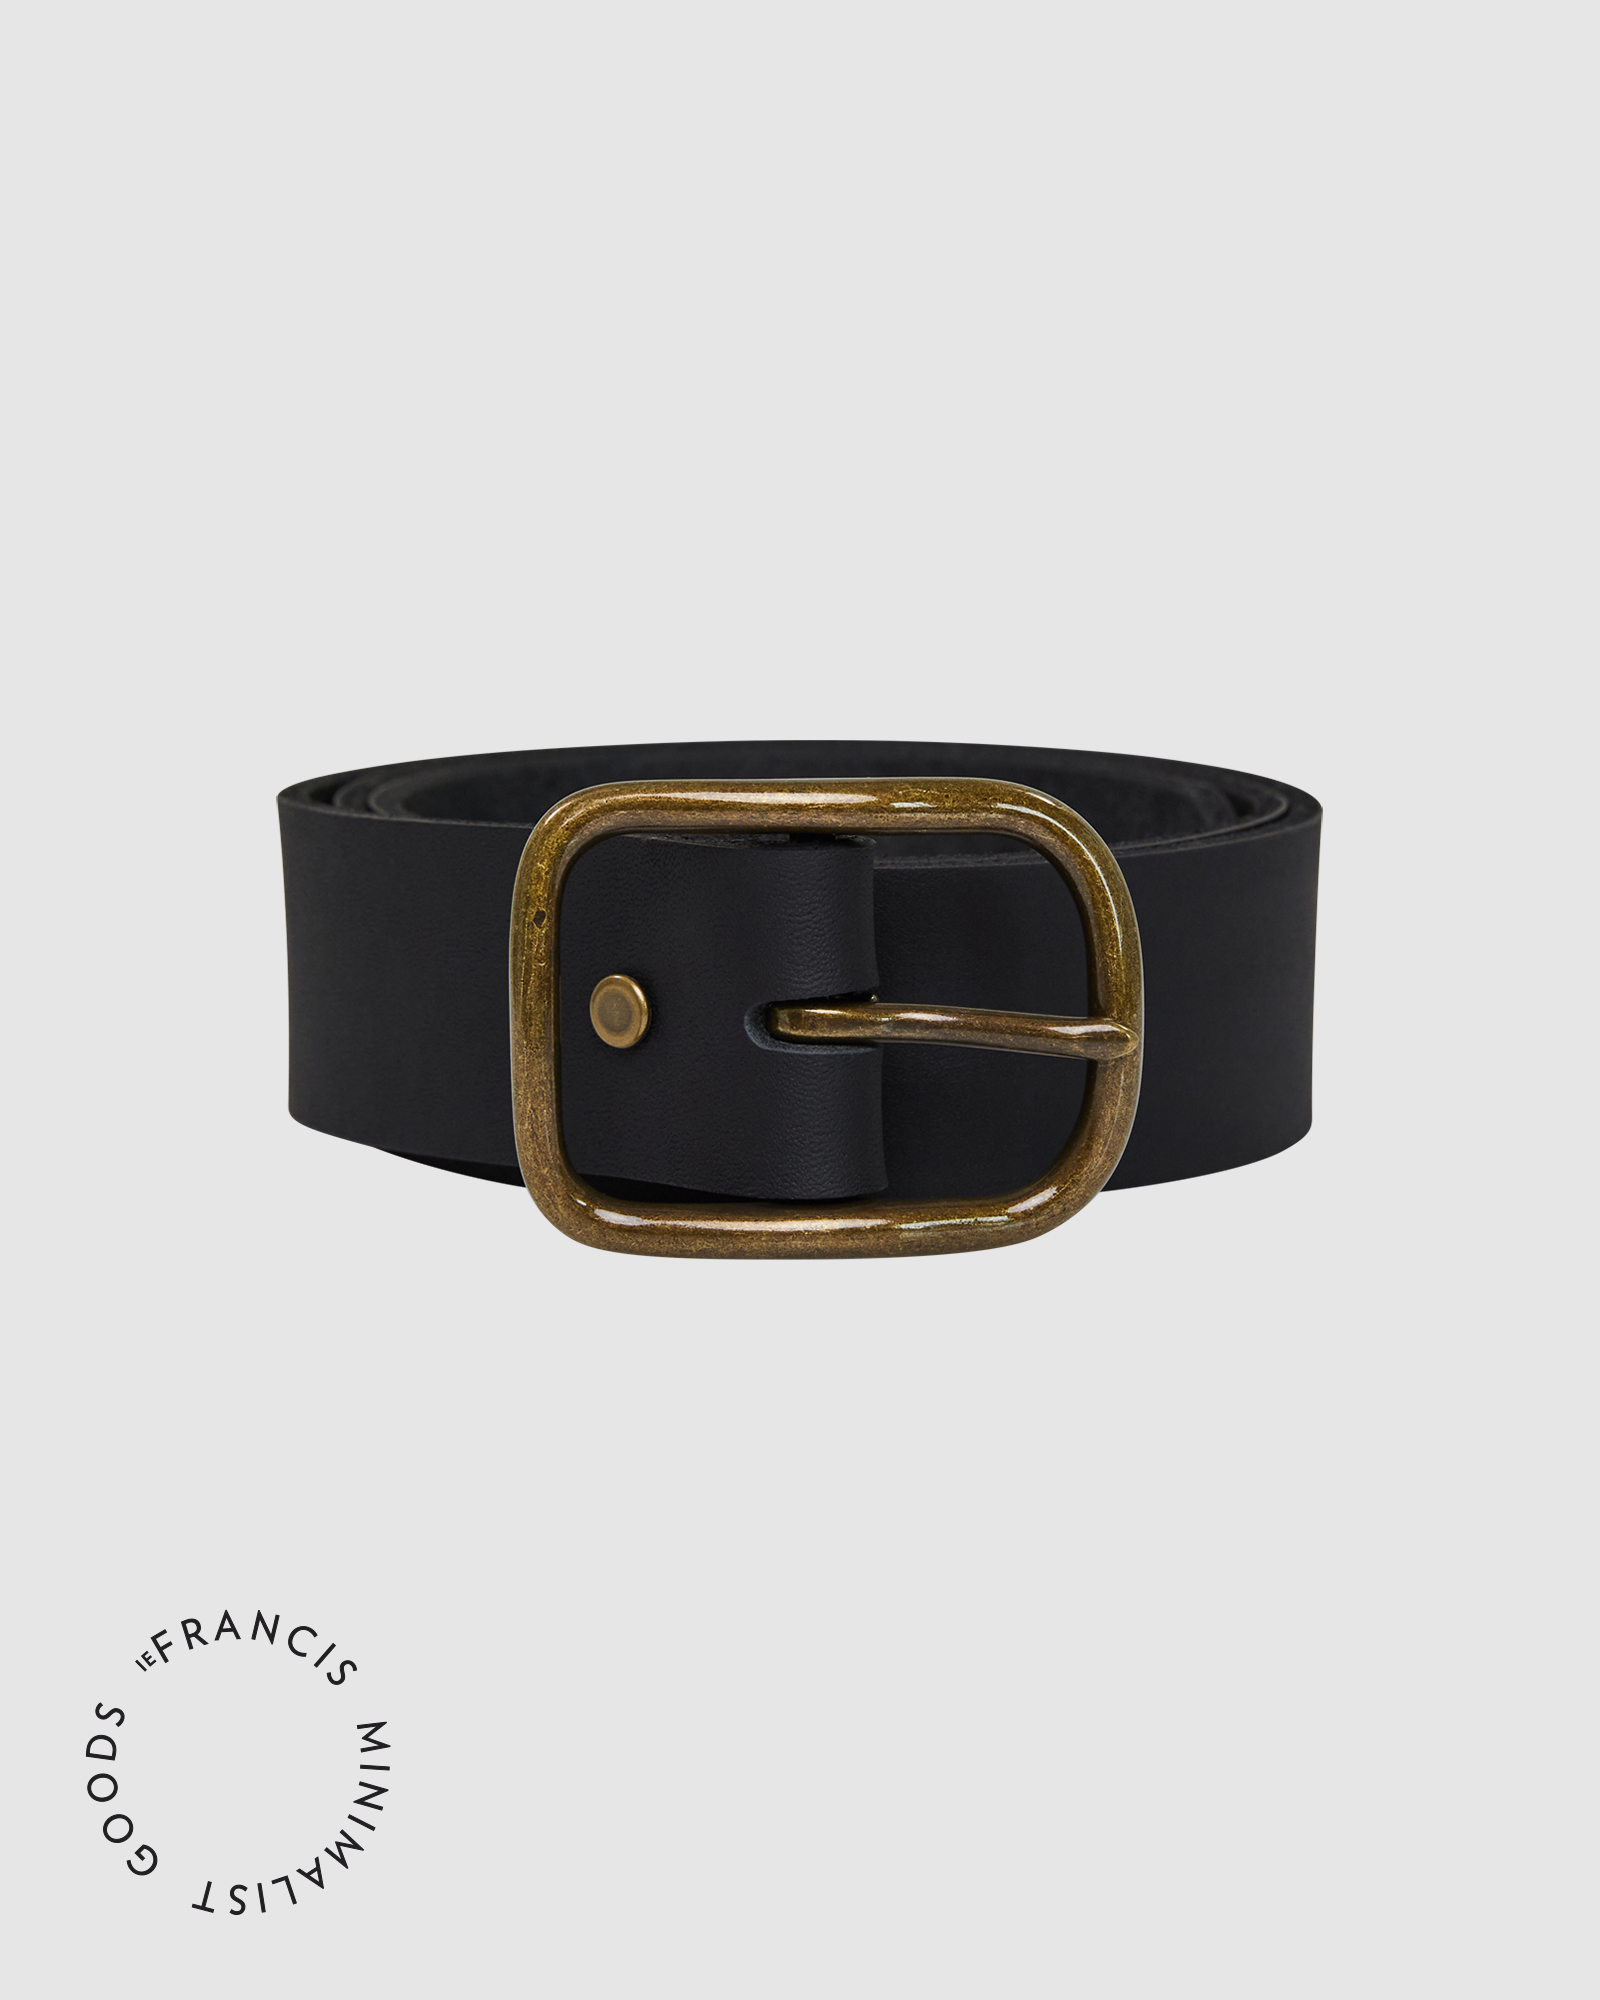 IEFrancis Leather Belt